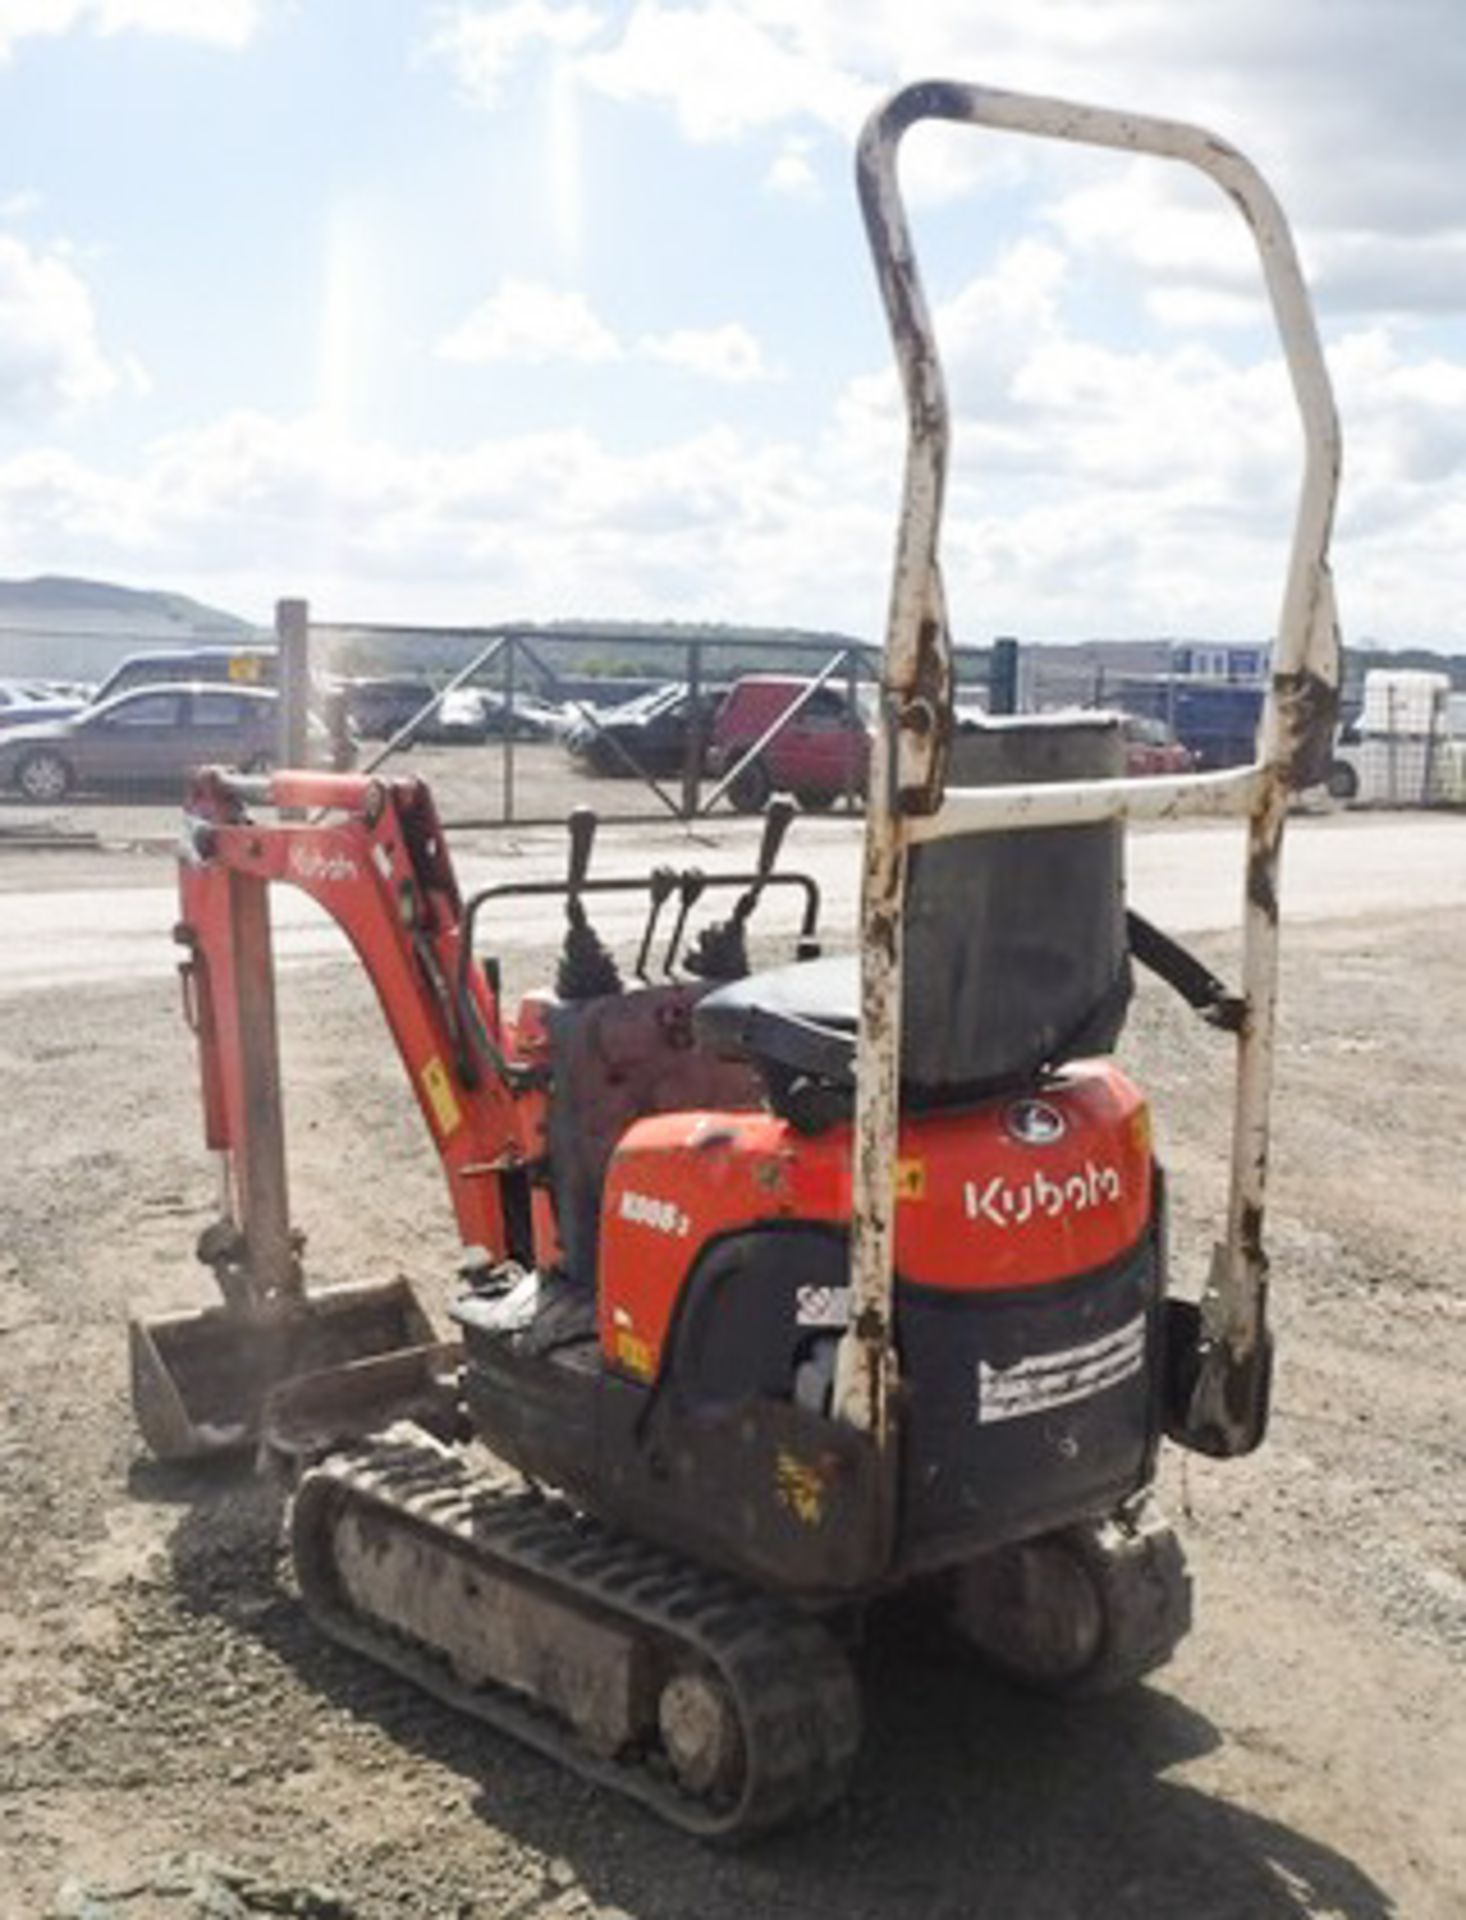 KUBOTA K008-3 ULTRA COMPACT EXCAVATOR C/W WITH BUCKET. SN12613. 3154 HRS. YEAR UNKNOWN - Image 8 of 18